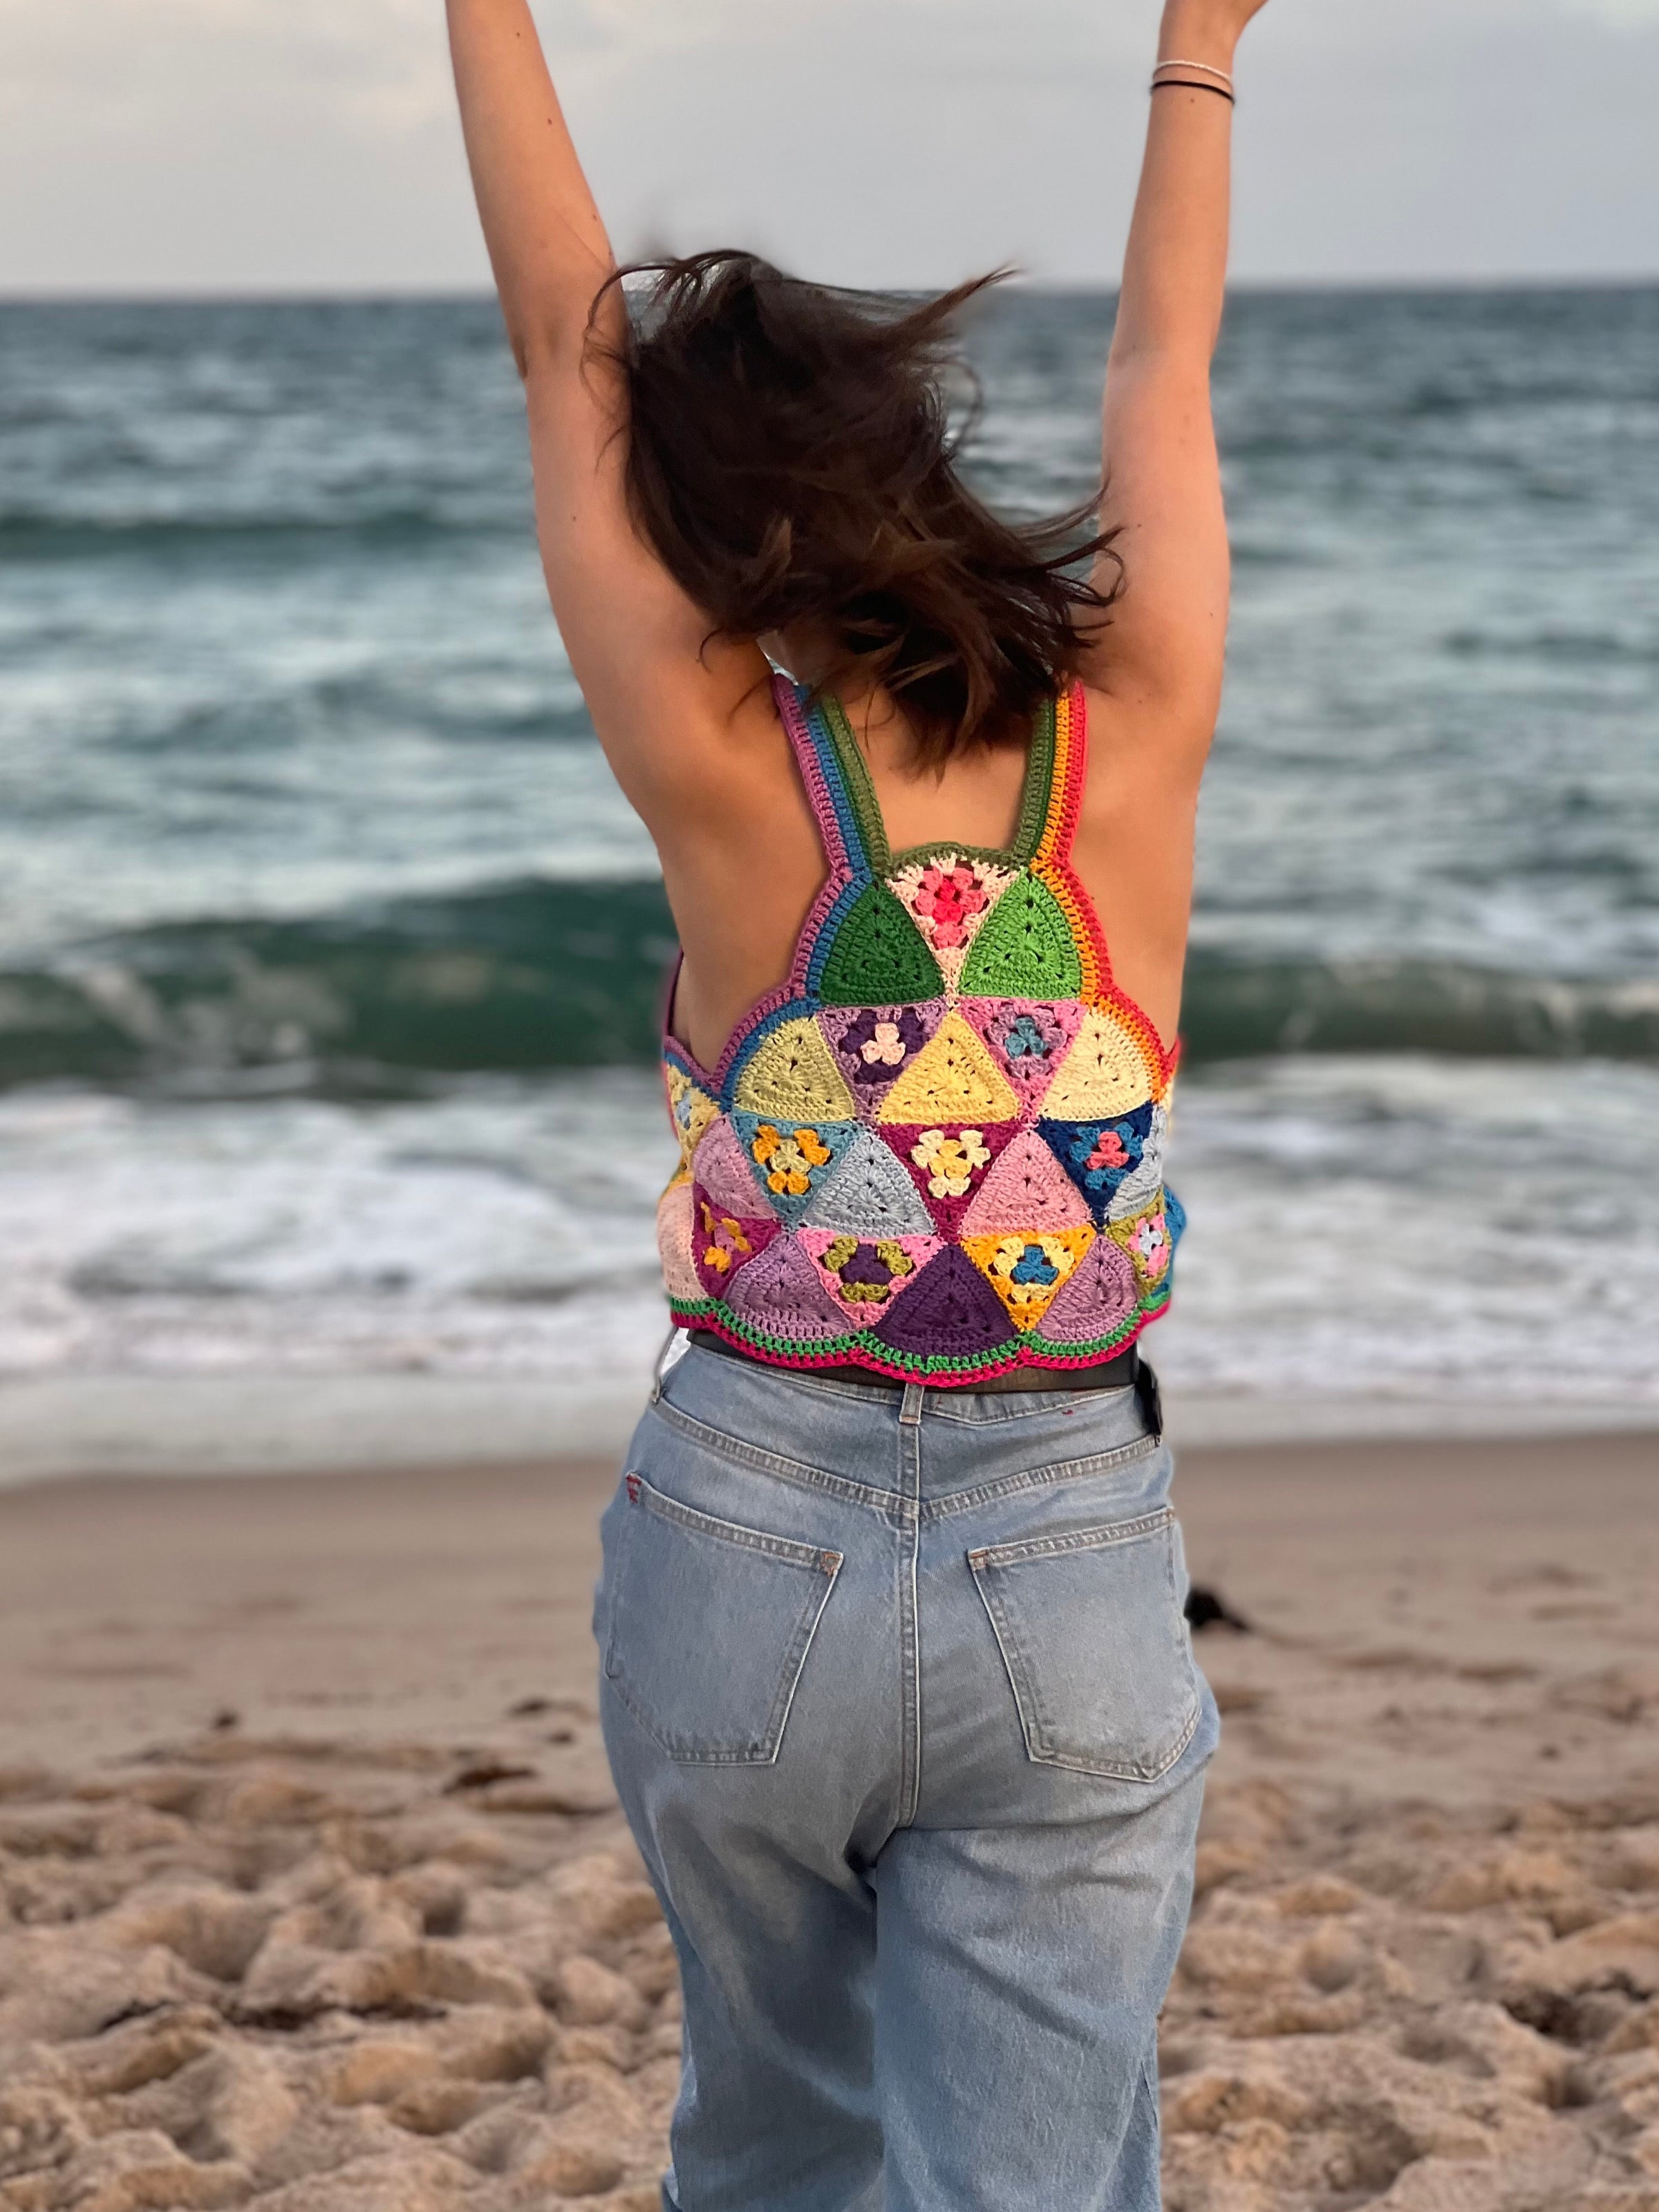 Crochet Triangle summer top PDF pattern (instant download)